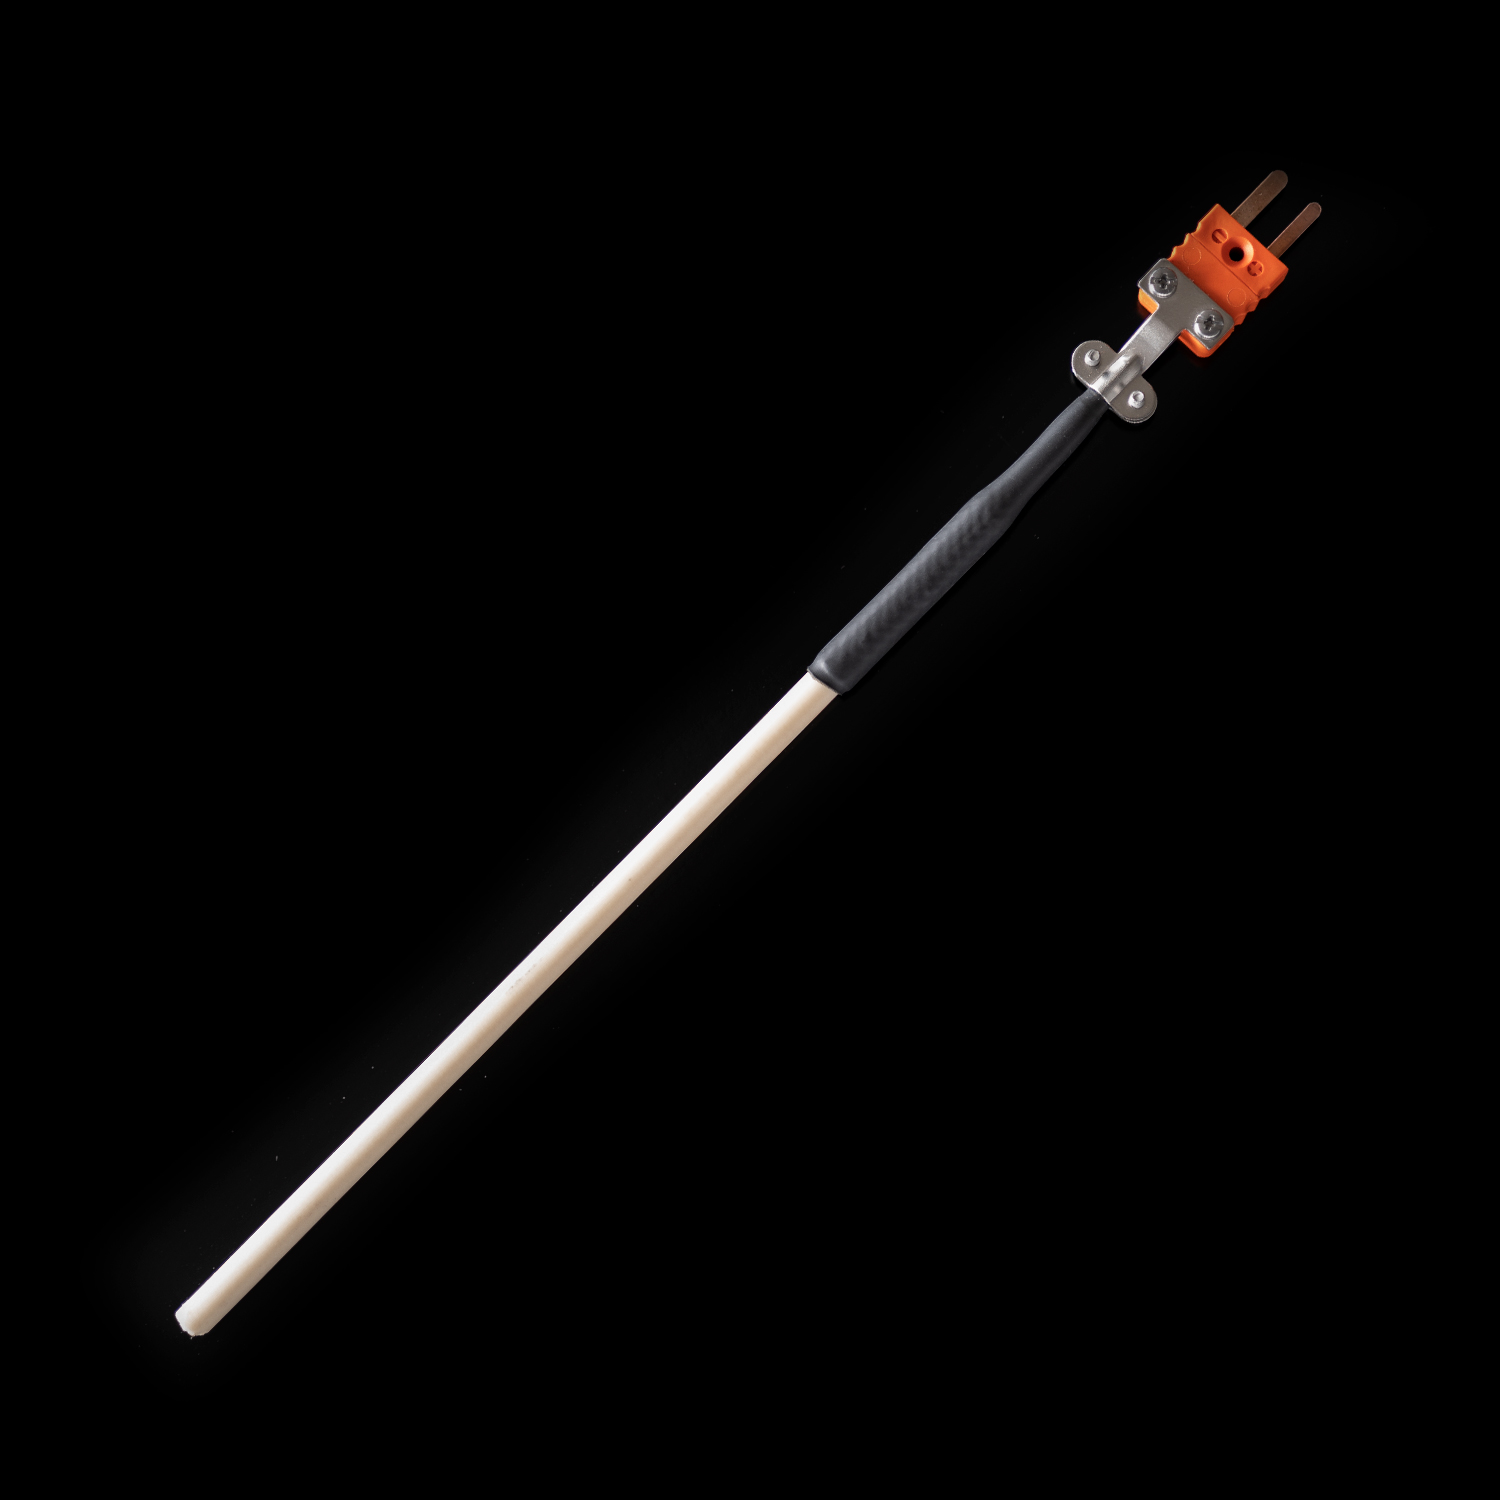 Sheath thermocouple with ceramic protection tubes